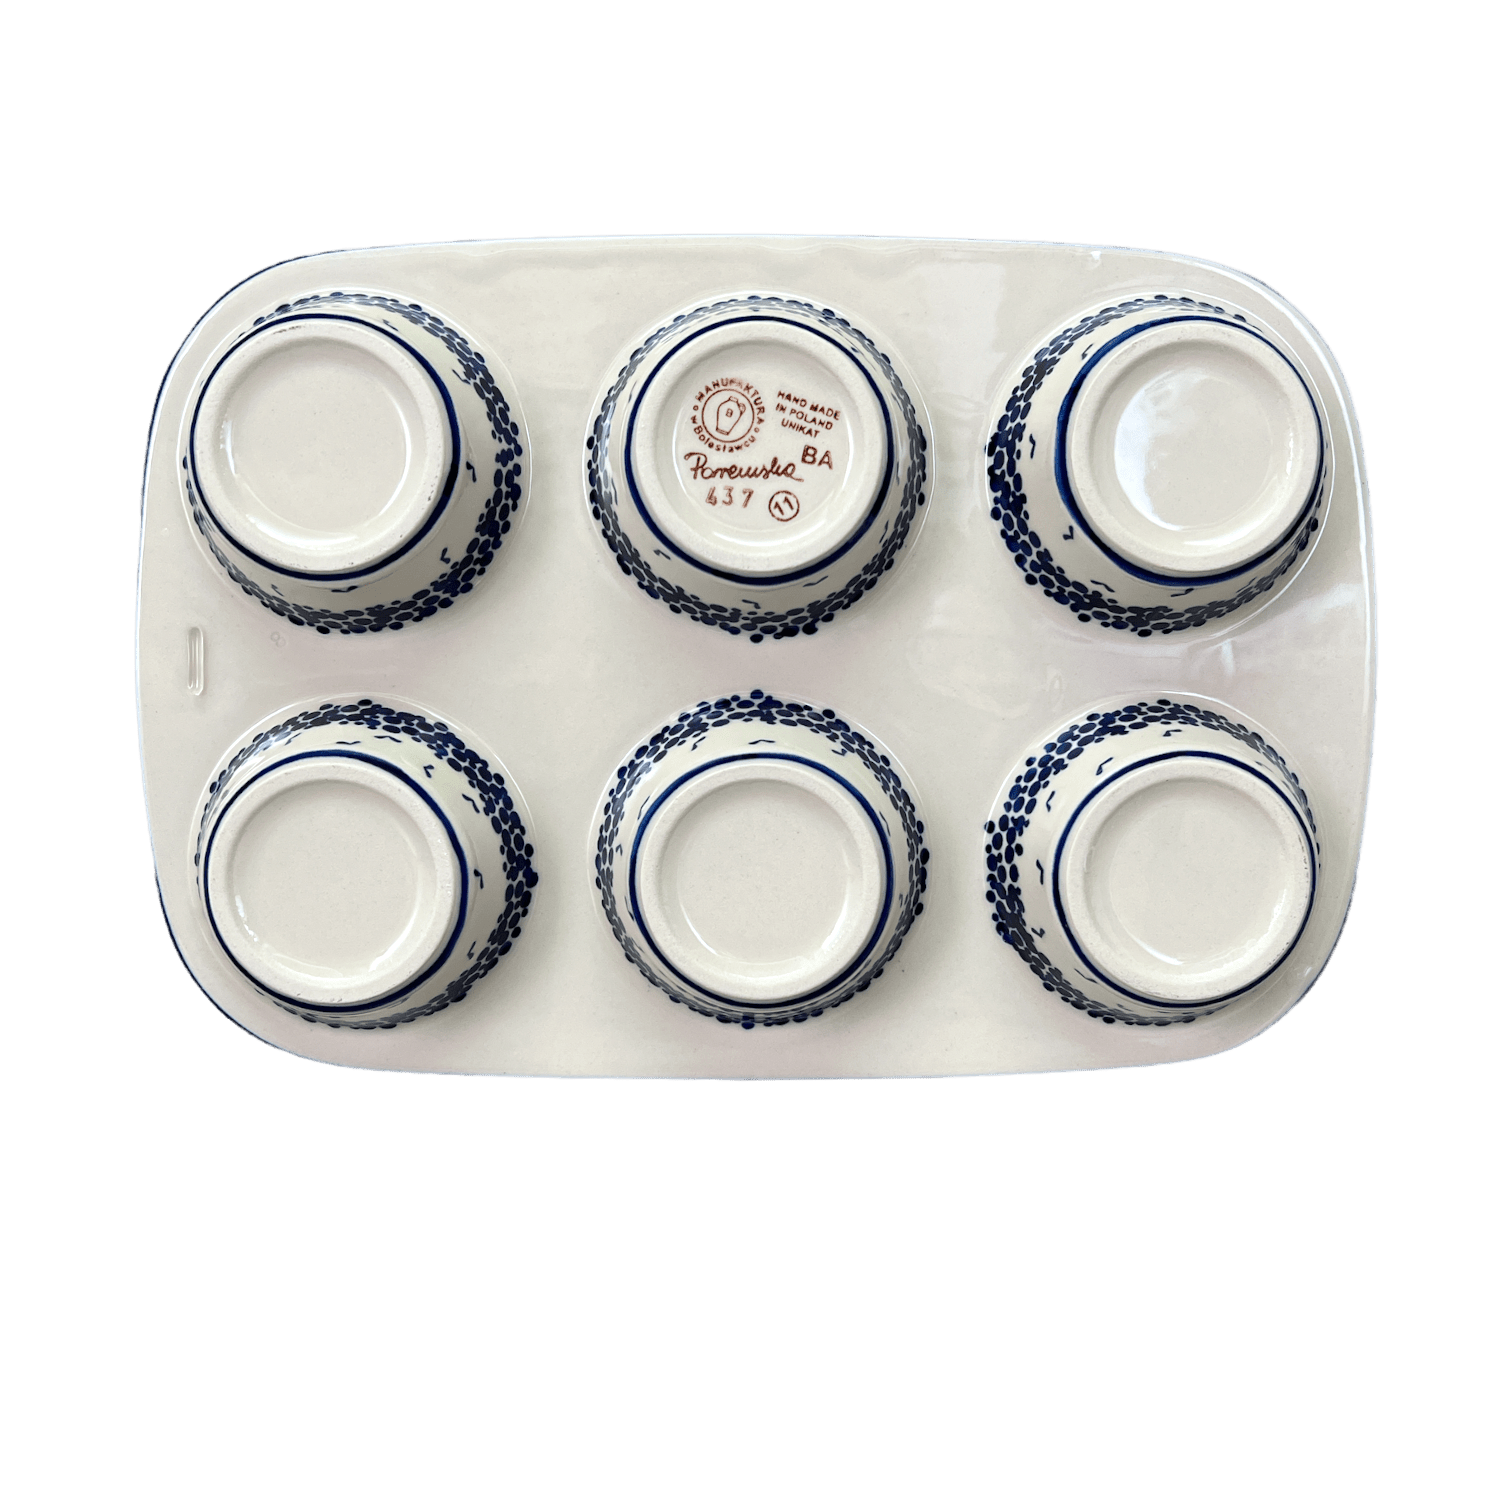 Muffin Pan ~ 2321X - T4! – More Polish Pottery